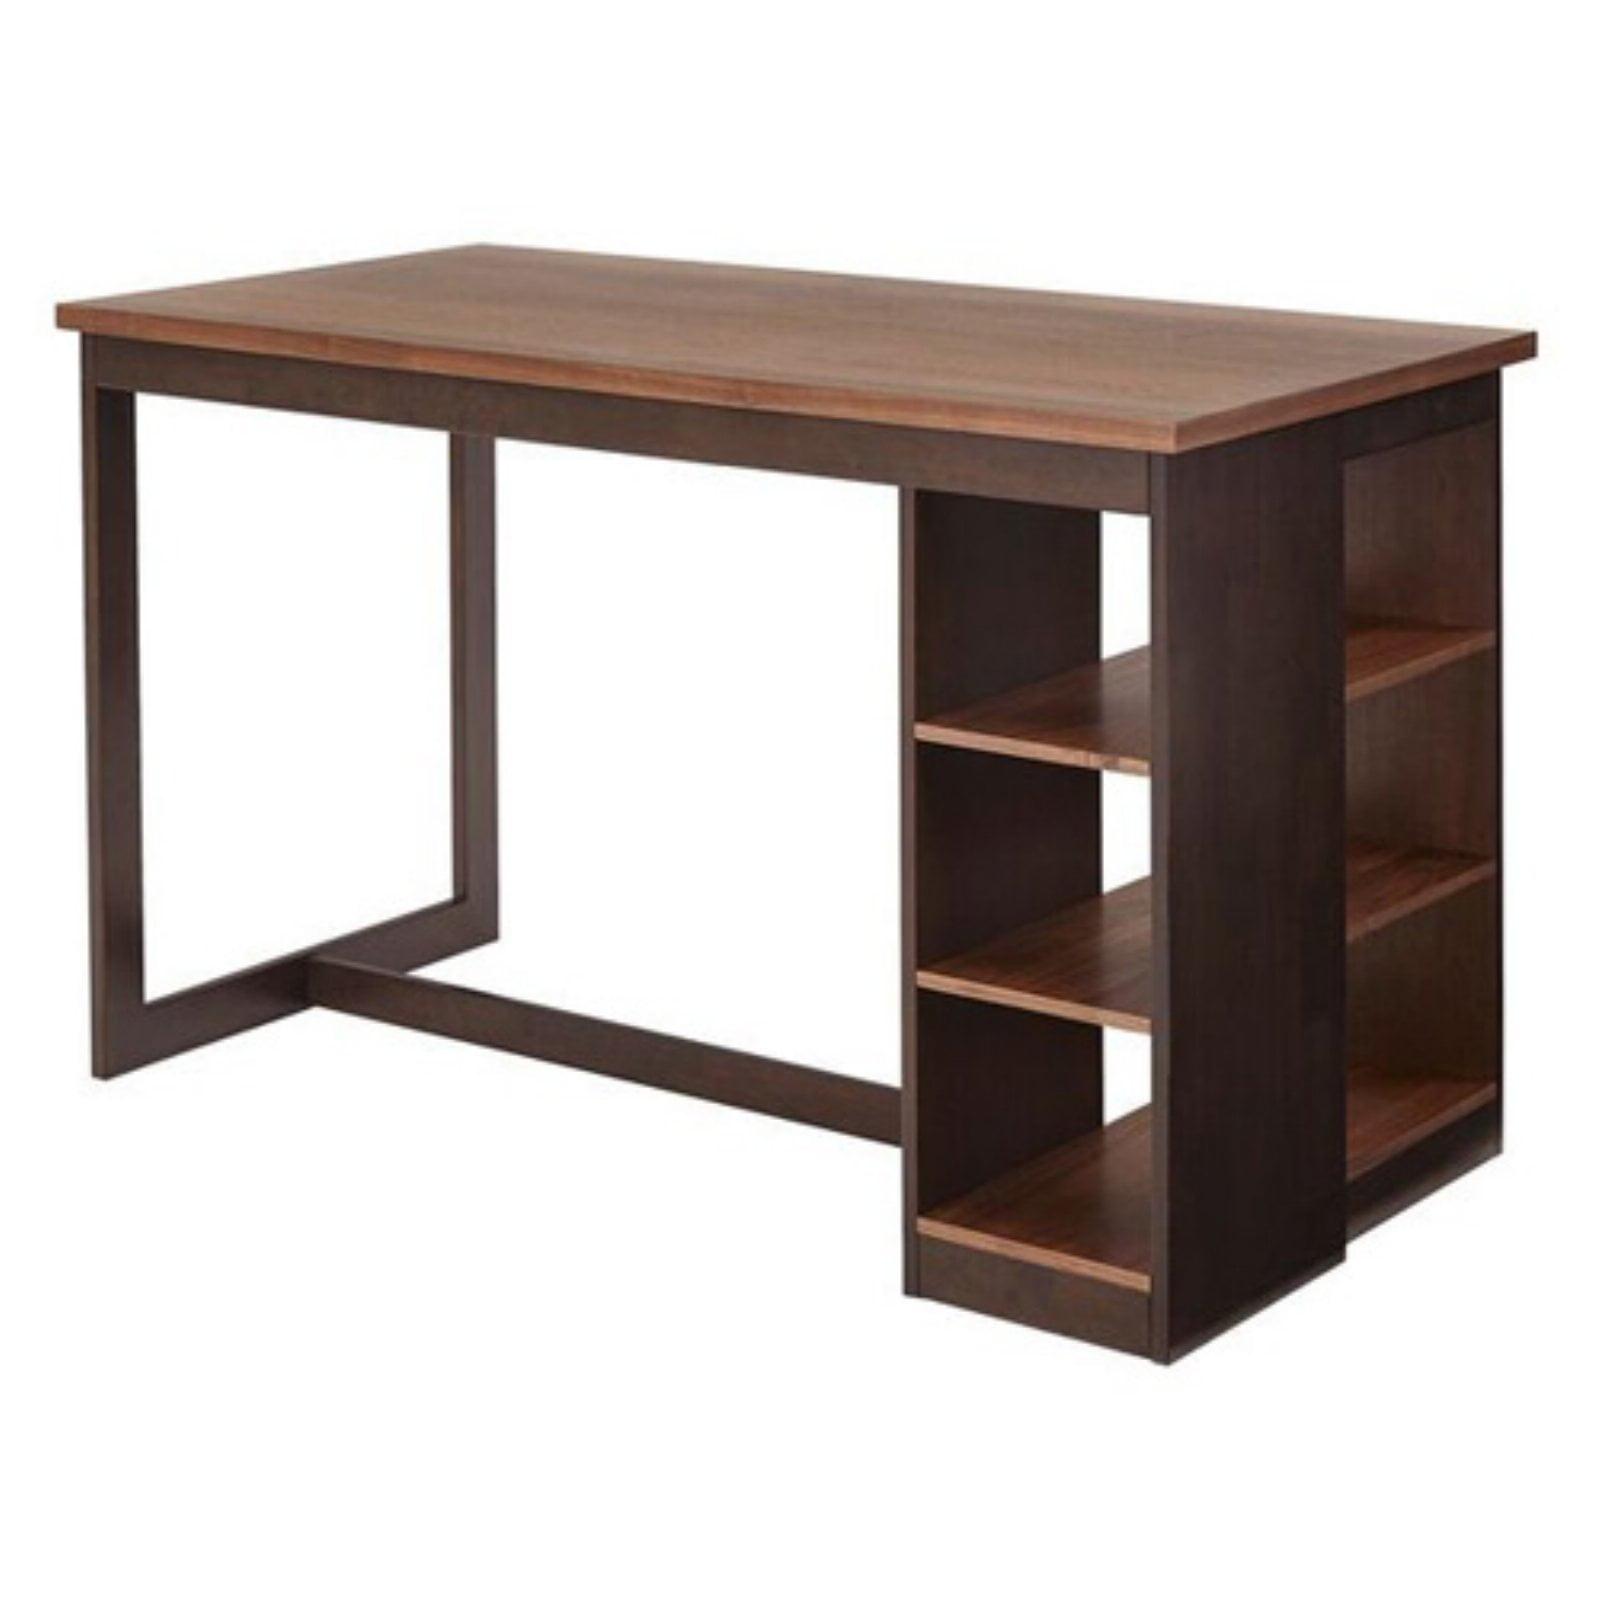 Transitional Walnut Brown Counter Height Storage Table with Adjustable Shelves